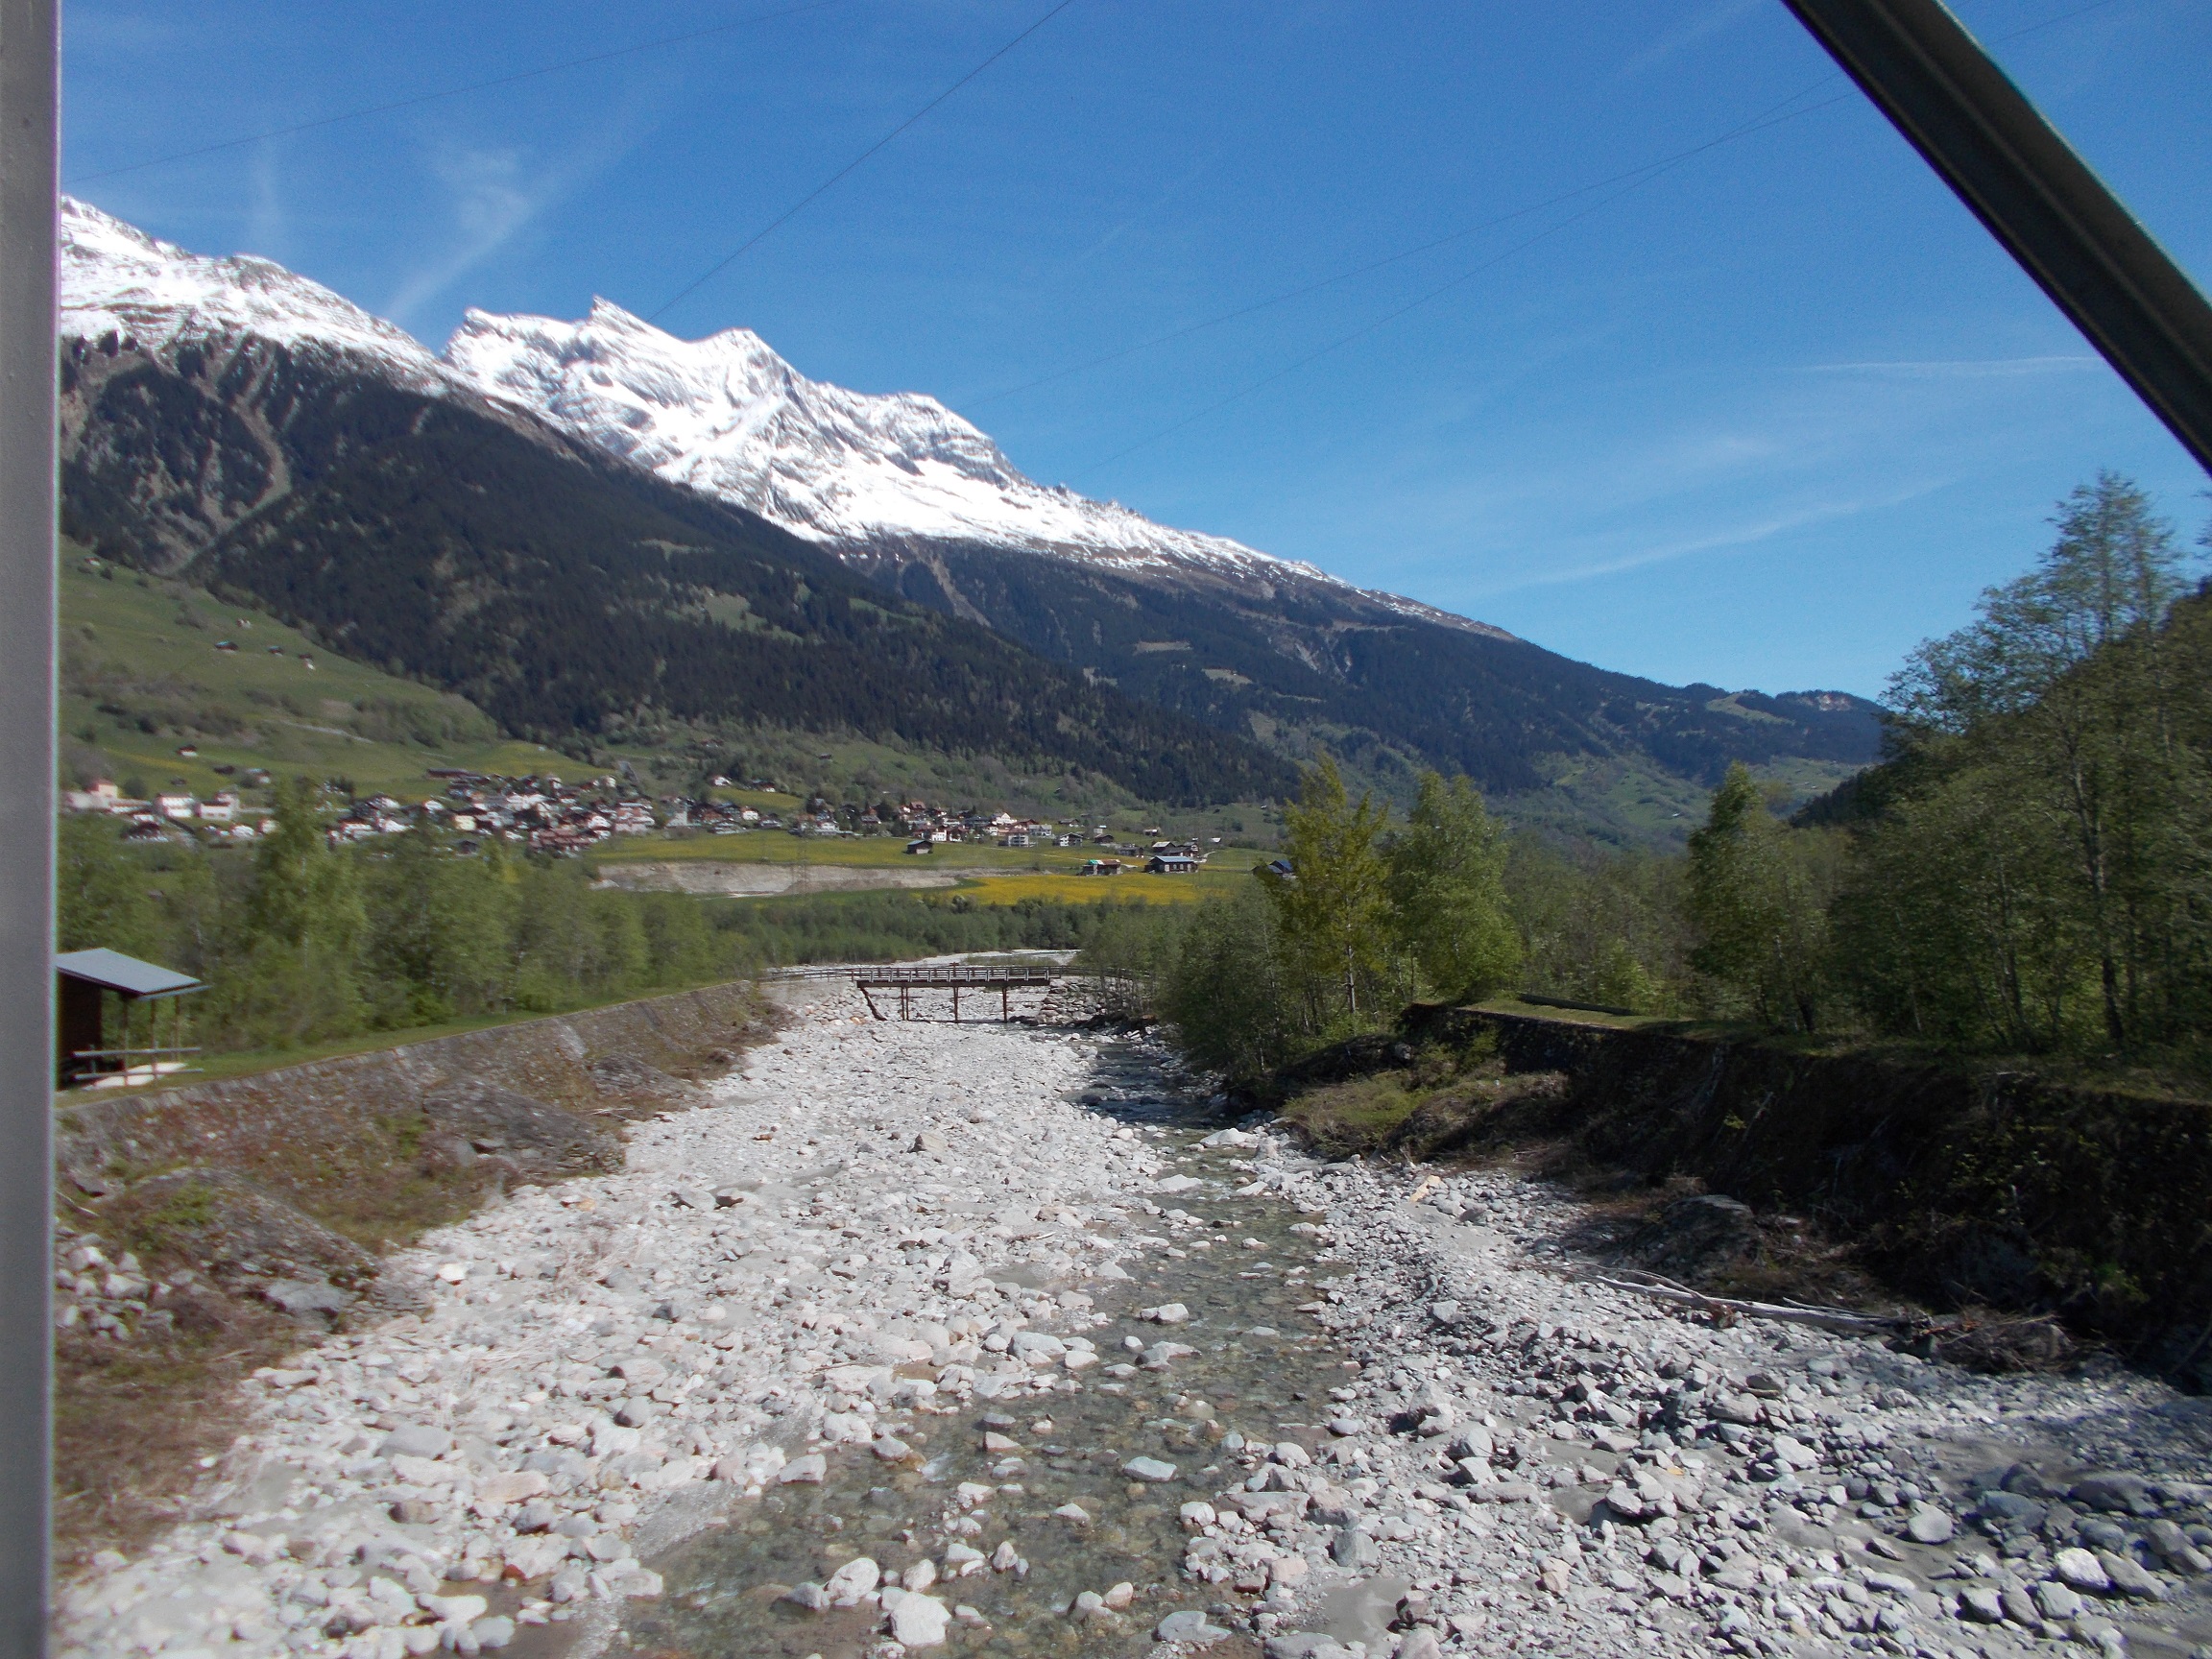 A riverbed with the Rhine running through it. Mountains and a town are visible in the background.